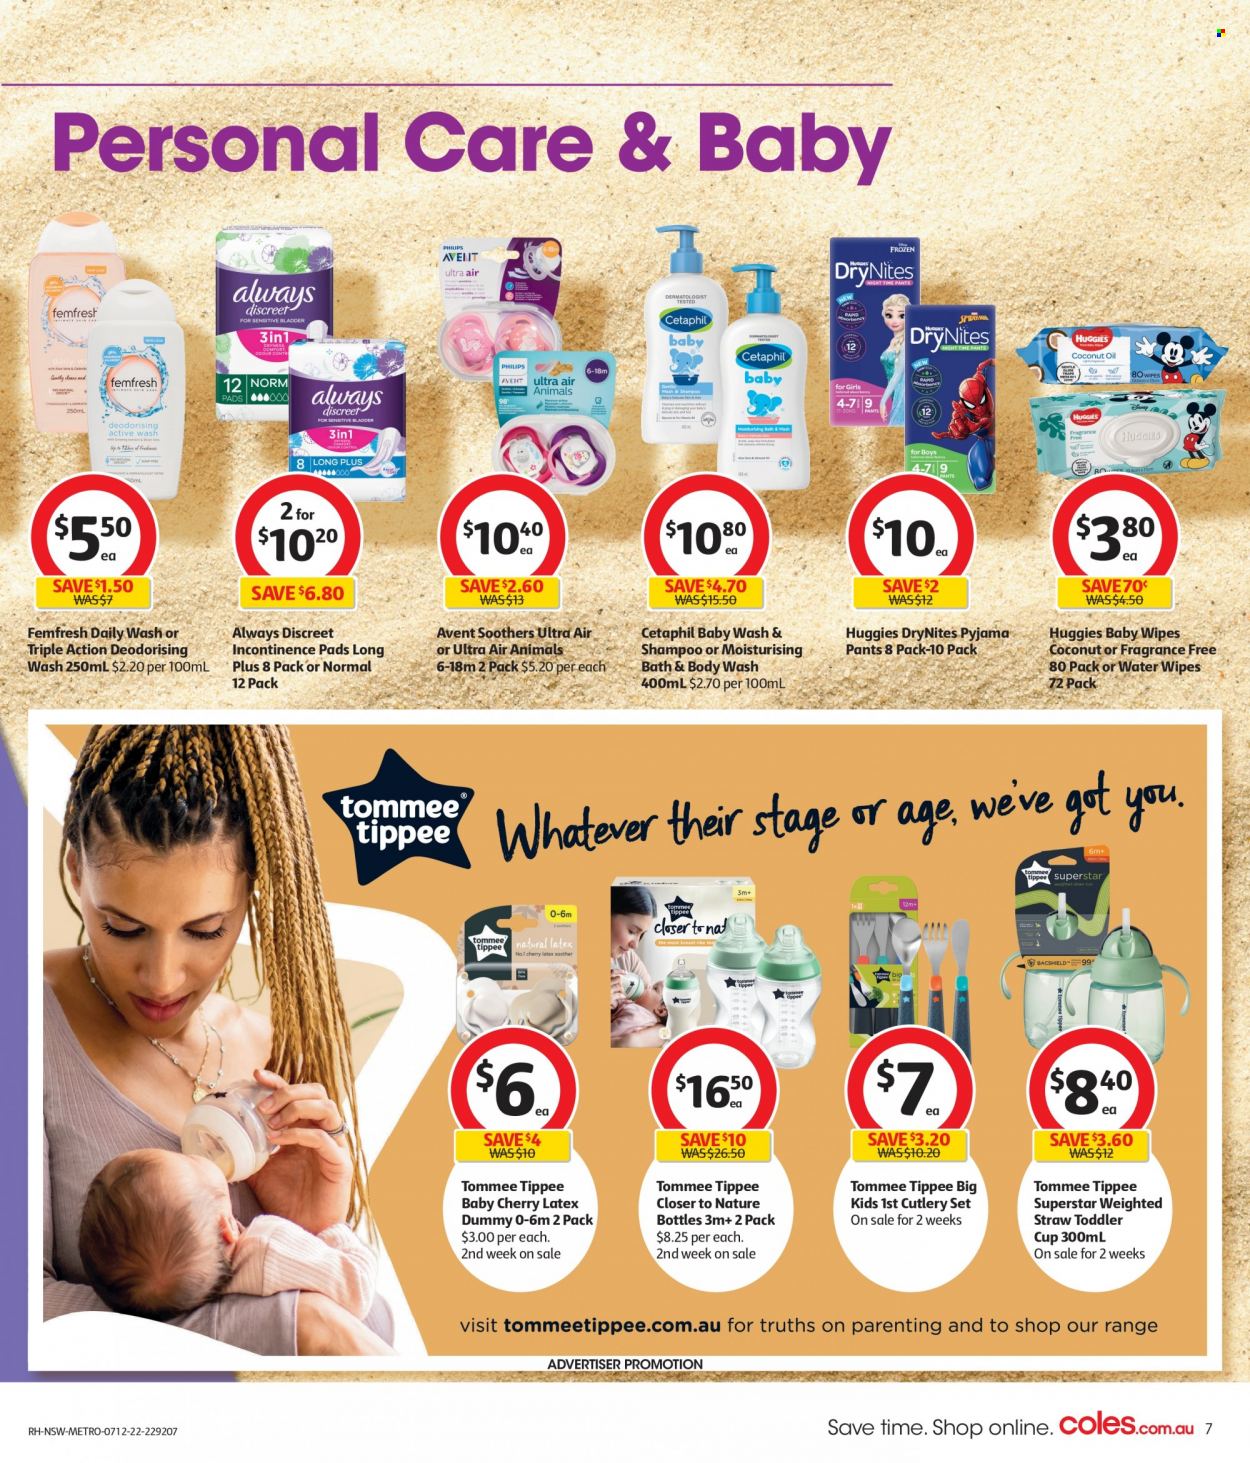 thumbnail - Coles Catalogue - 7 Dec 2022 - 13 Dec 2022 - Sales products - Philips, cherries, soother, oil, wipes, Huggies, pants, baby wipes, DryNites, body wash, shampoo, Always Discreet, cutlery set, cup, straw. Page 7.